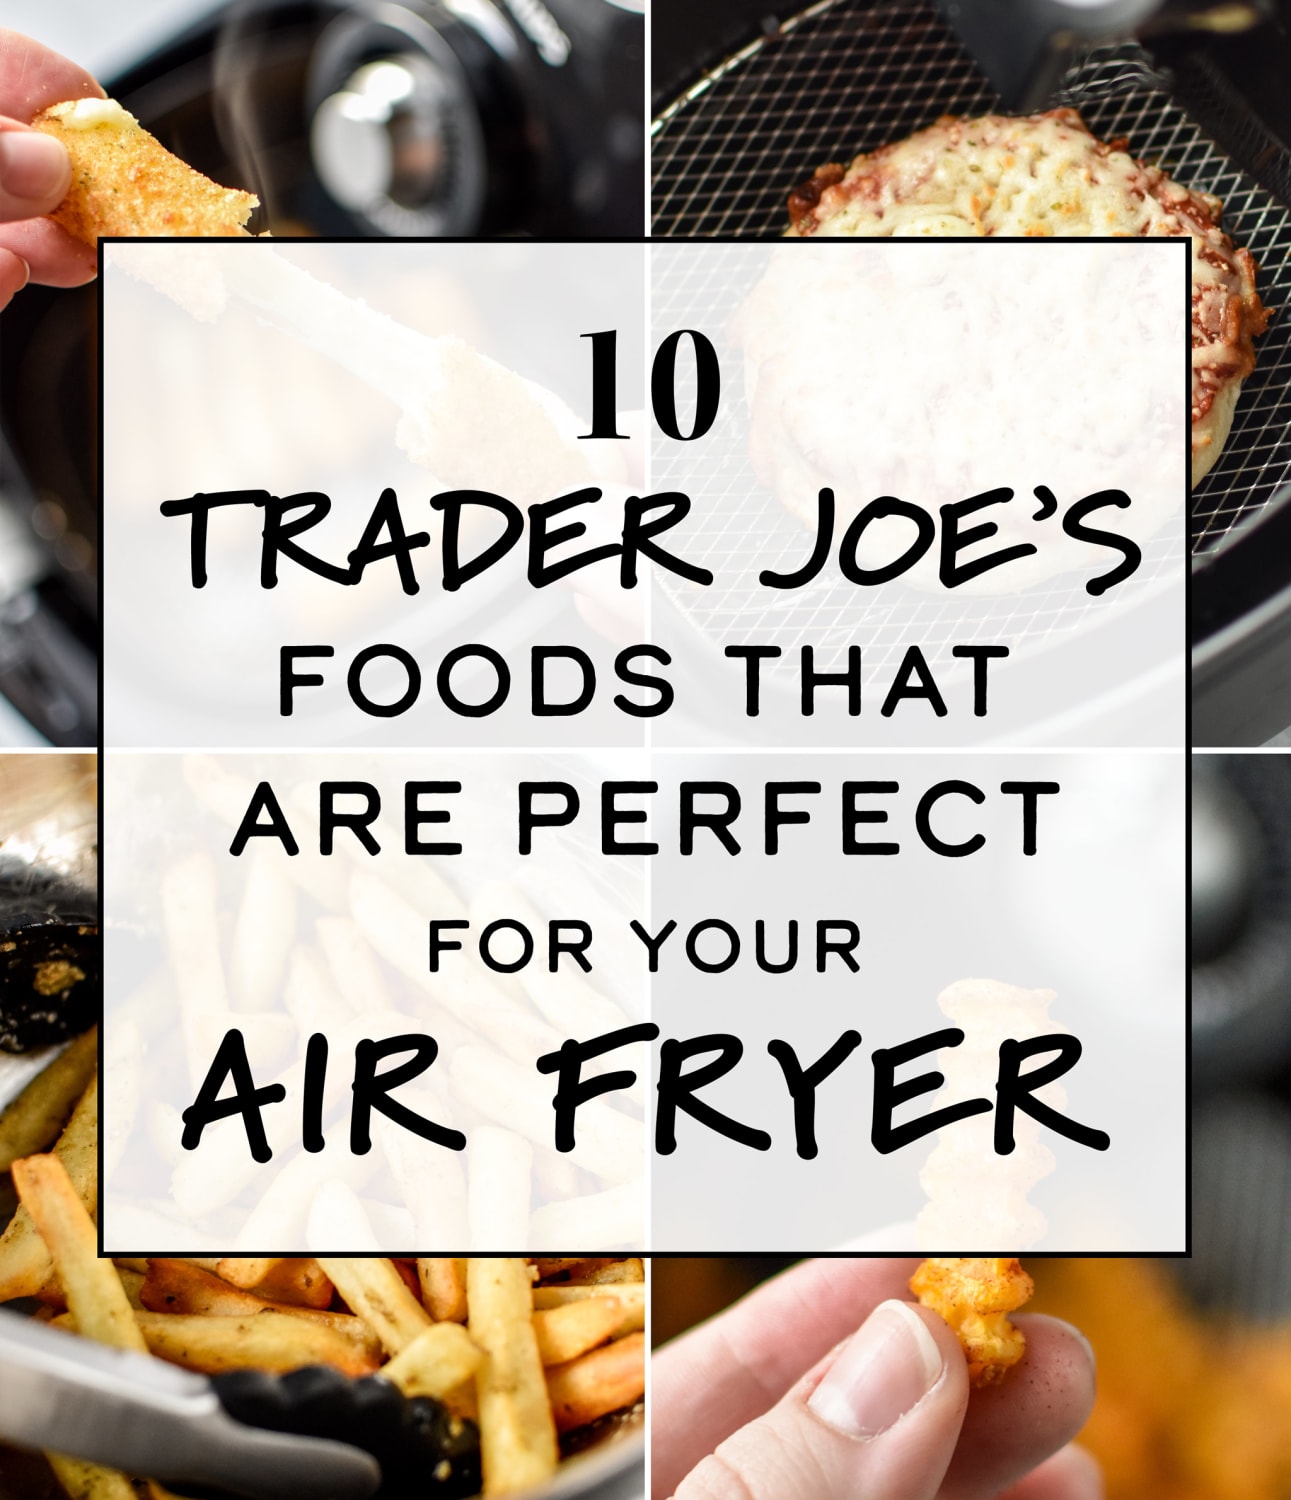 10 Trader Joe's Foods That Are Perfect for Your Air Fryer